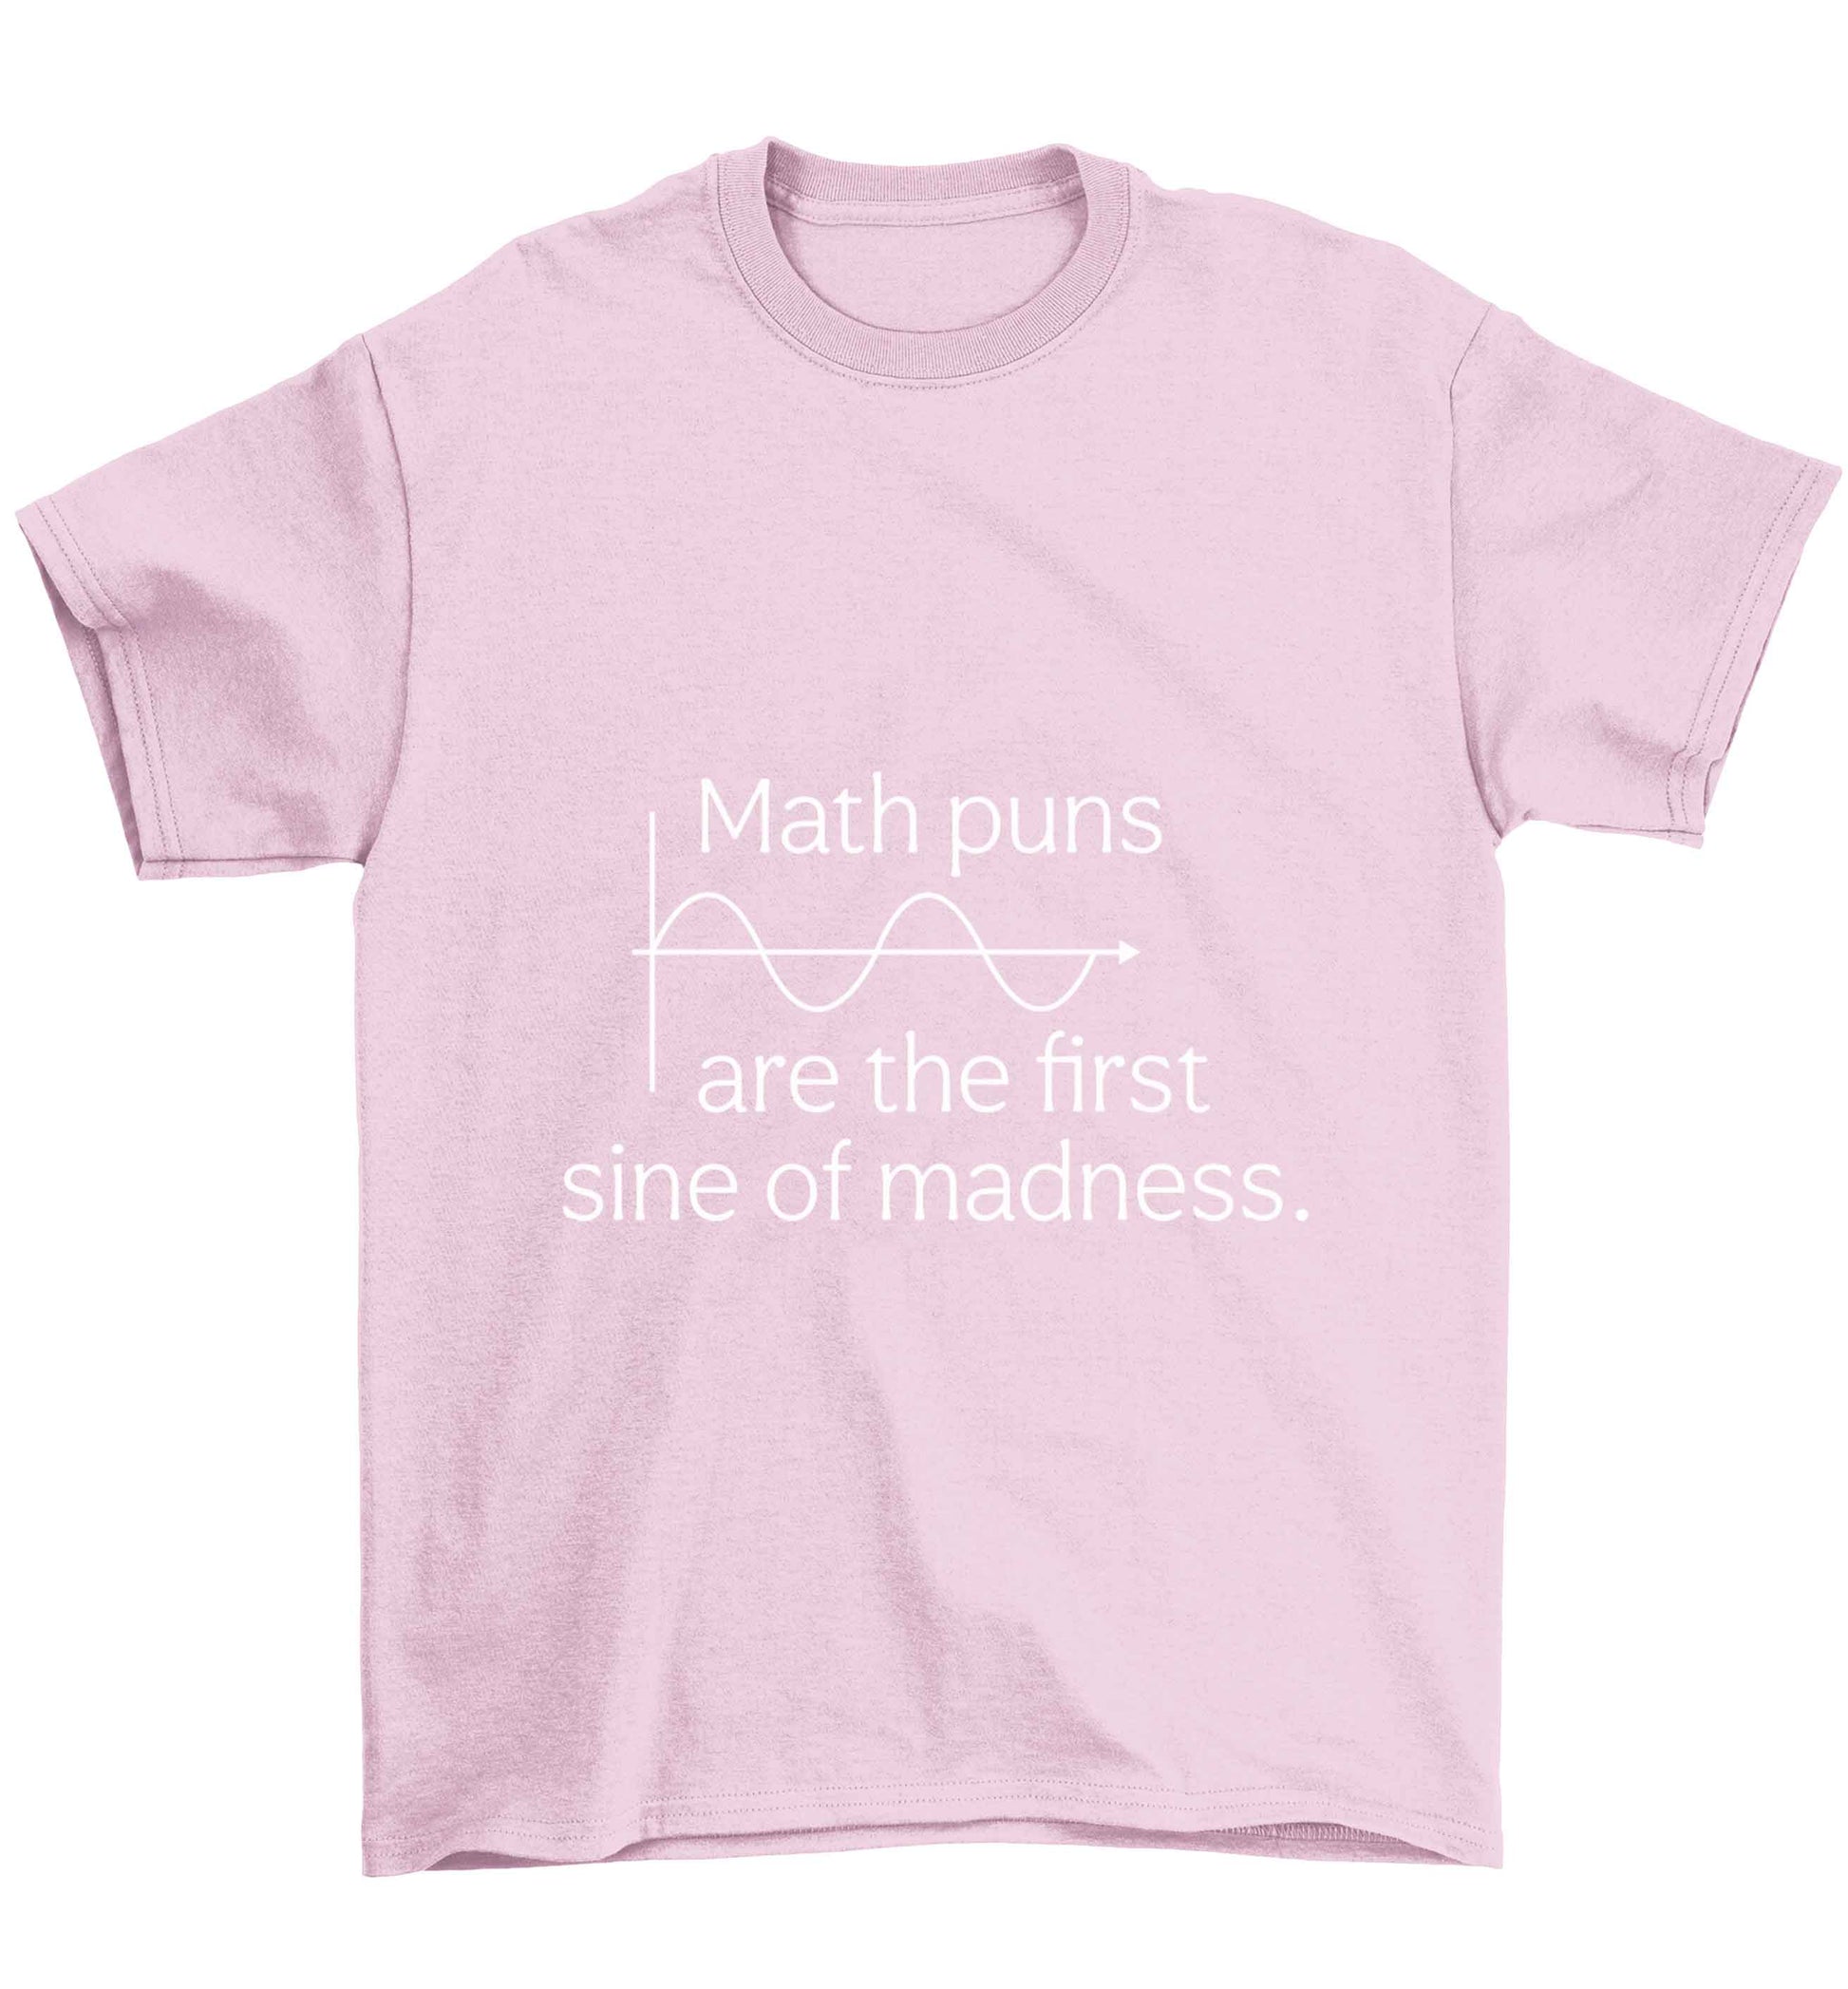 Math puns are the first sine of madness Children's light pink Tshirt 12-13 Years